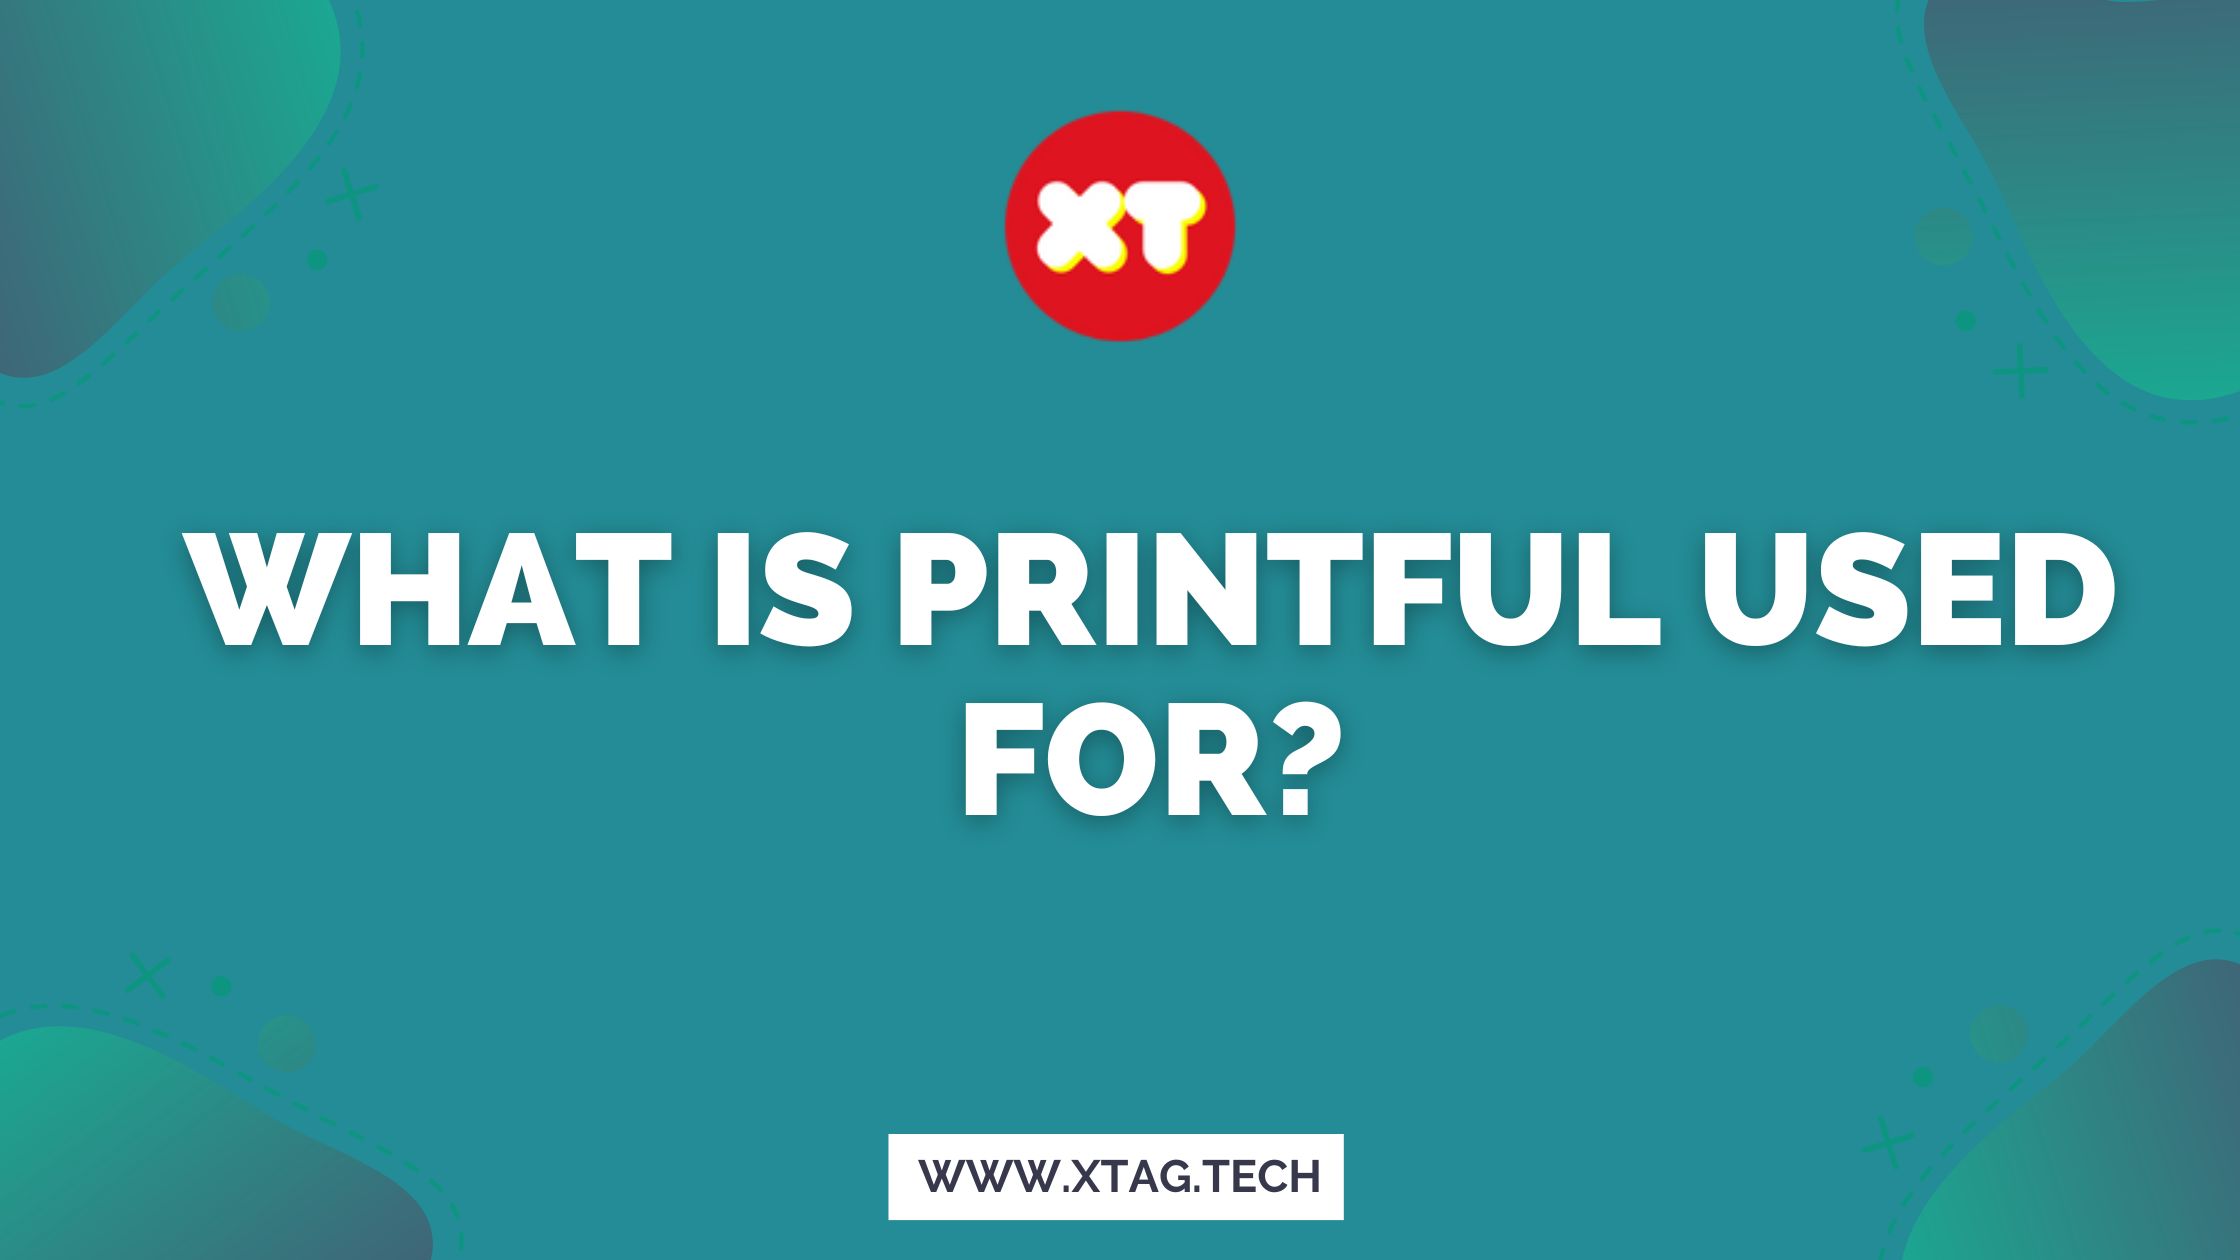 What Is Printful Used For?